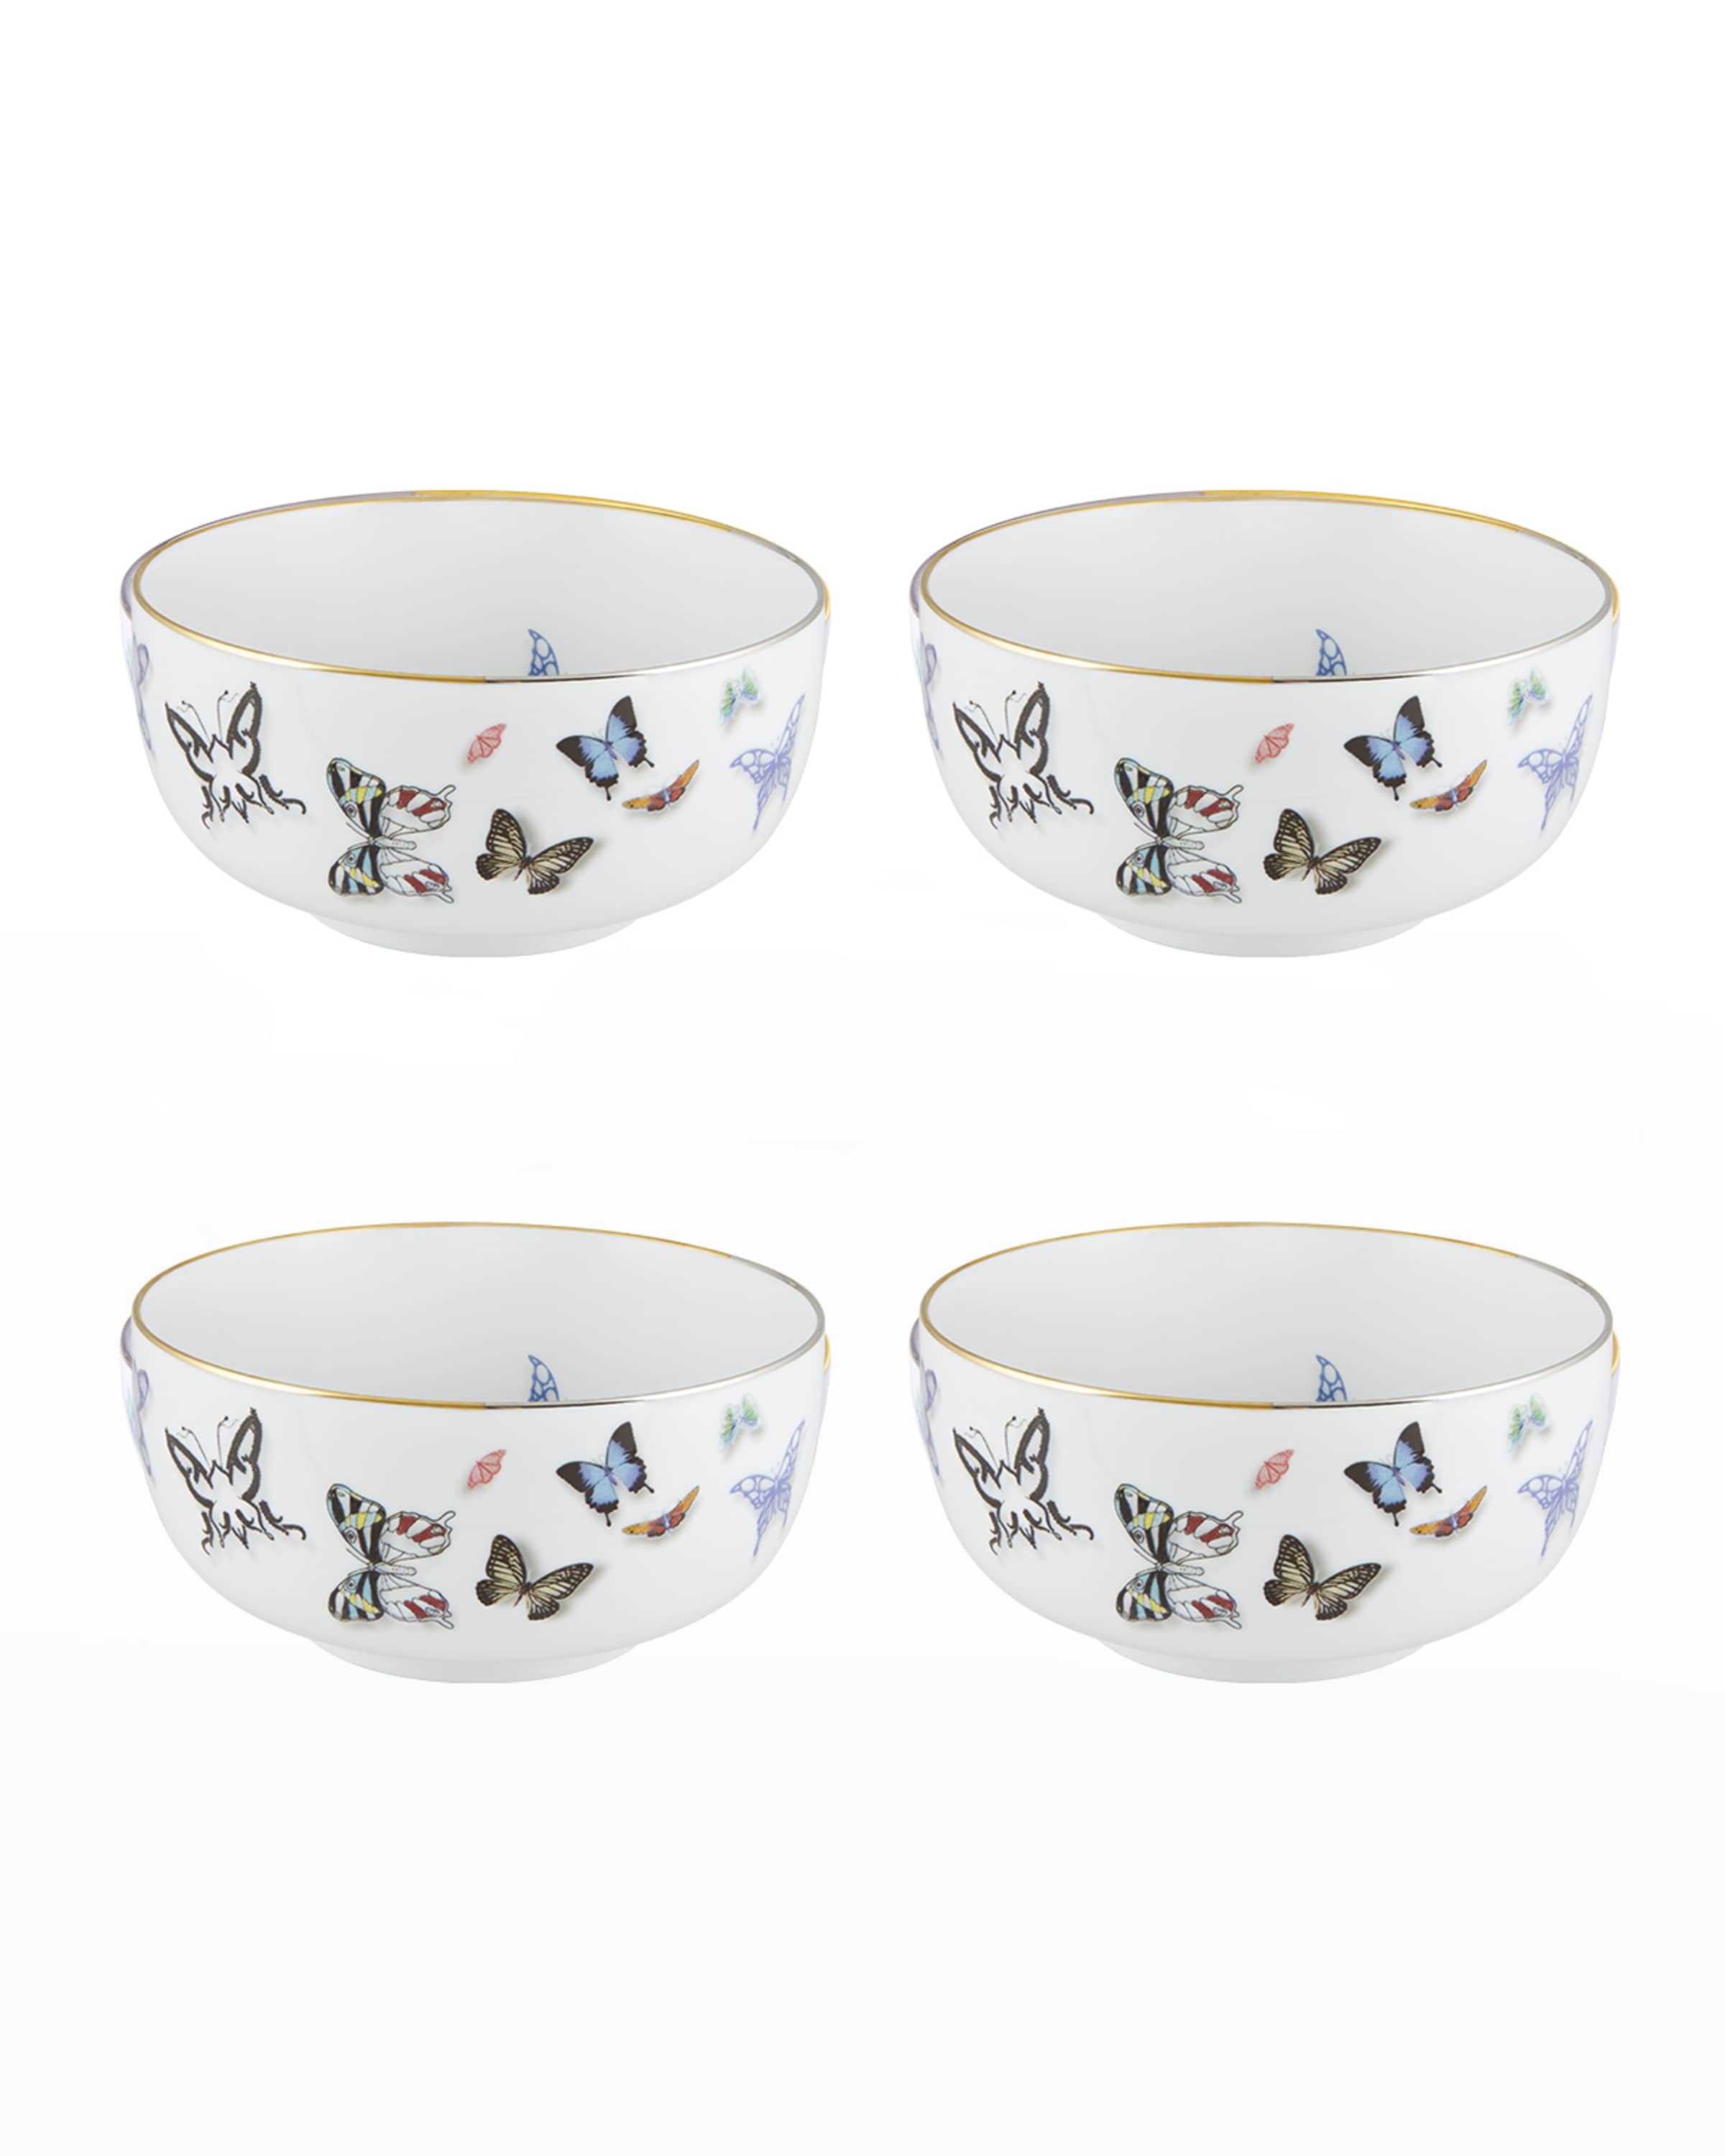 Christian Lacroix Butterfly Parade Rice Bowls, Set of 4